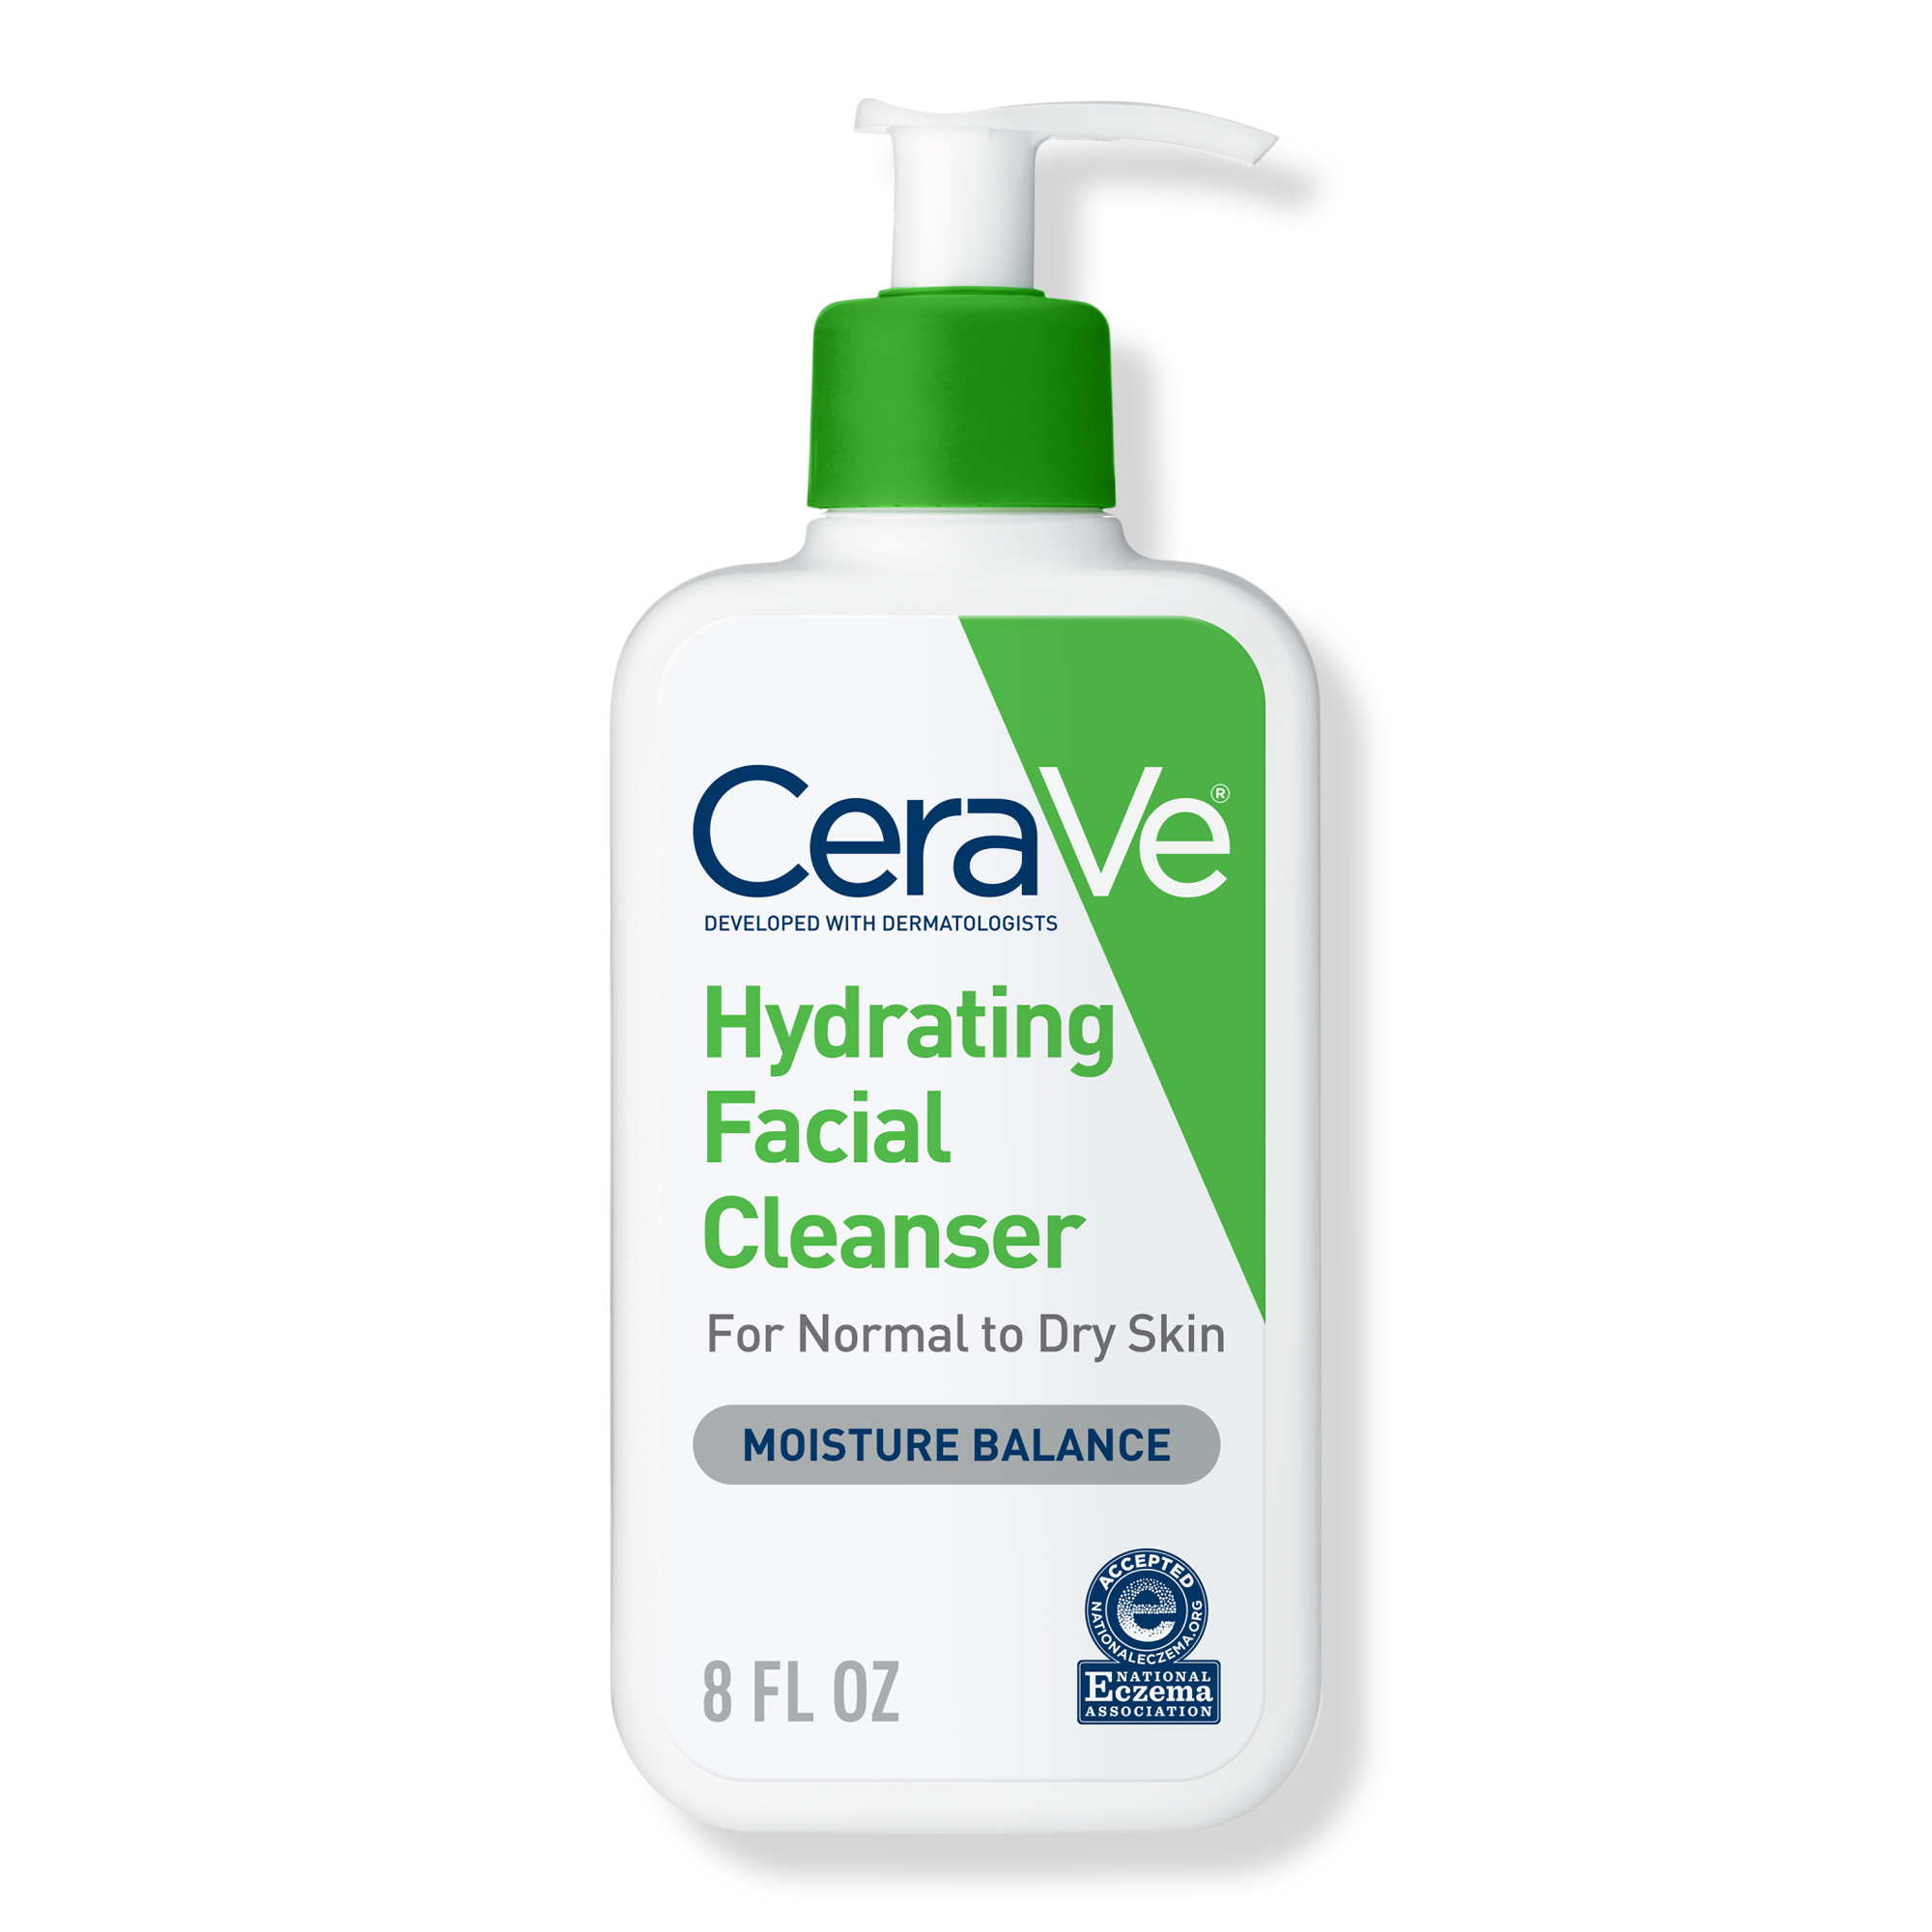 Hydrating Facial Cleanser with Ceramides and Hyaluronic Acid